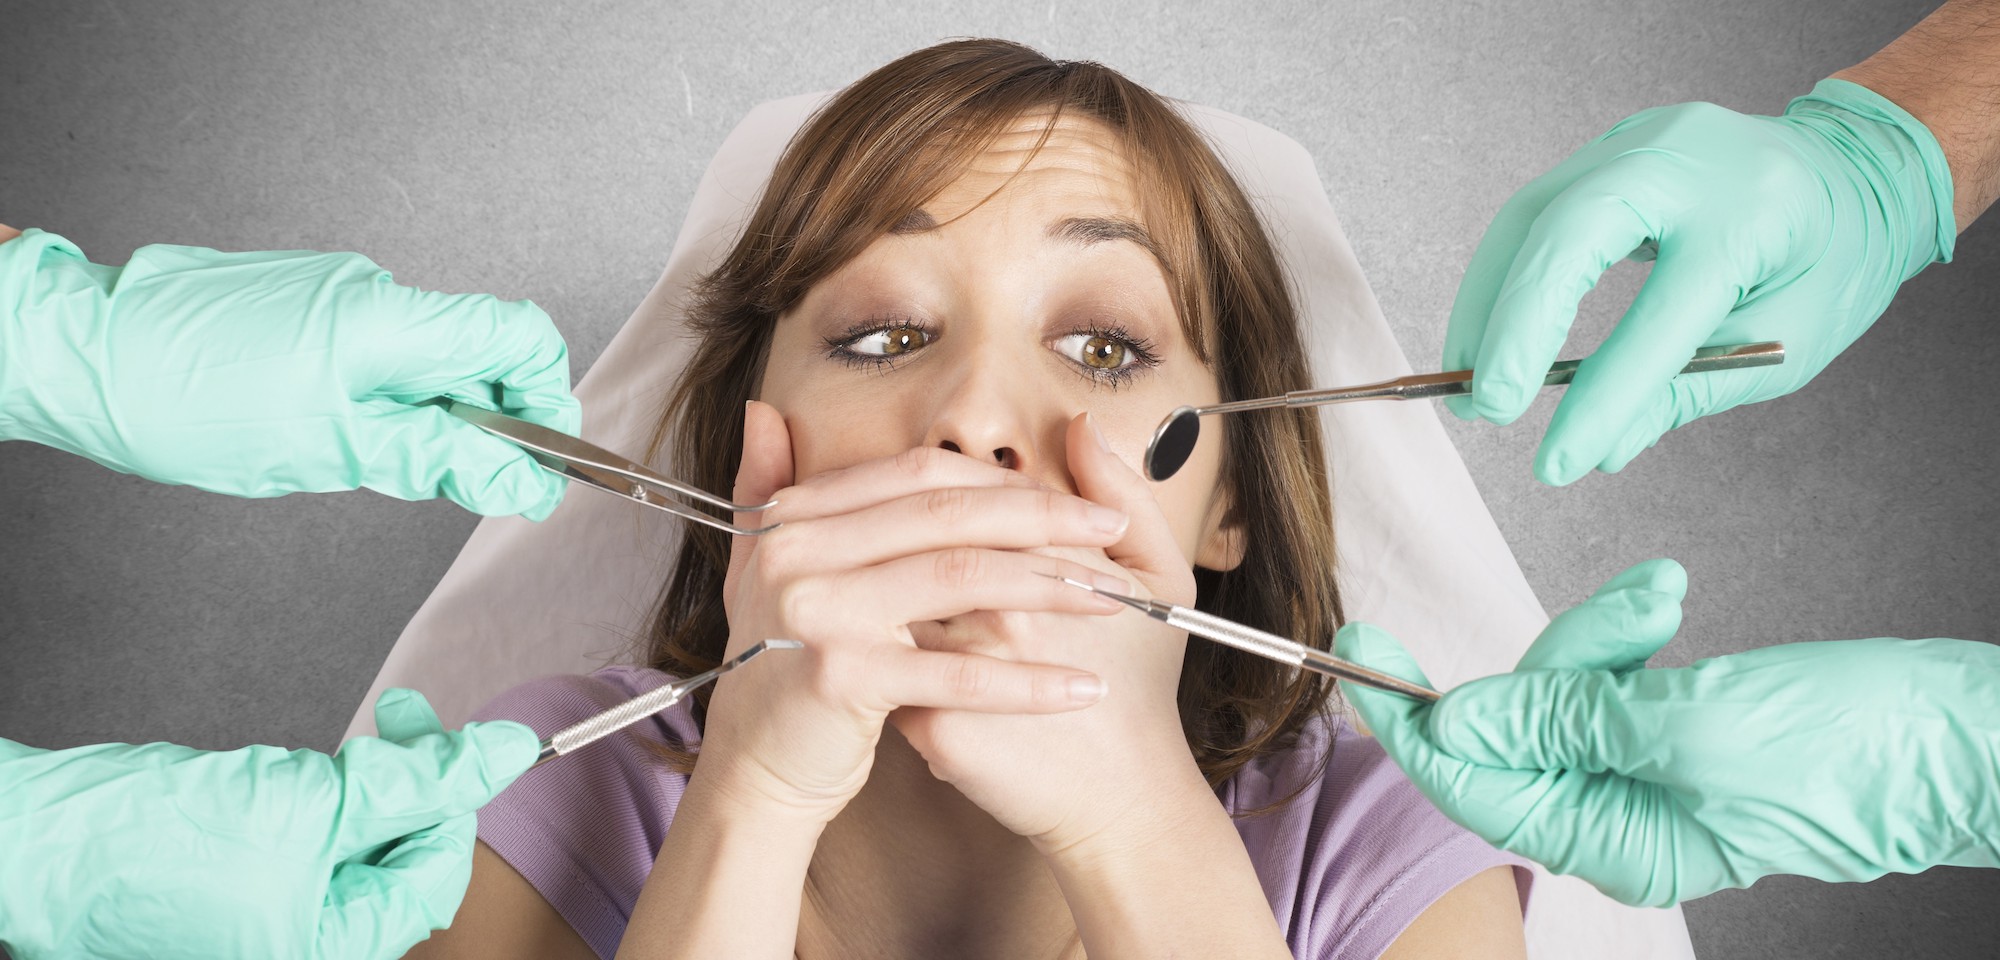 3 Top Tips For Dealing With The Fear Of Visiting The Dentist